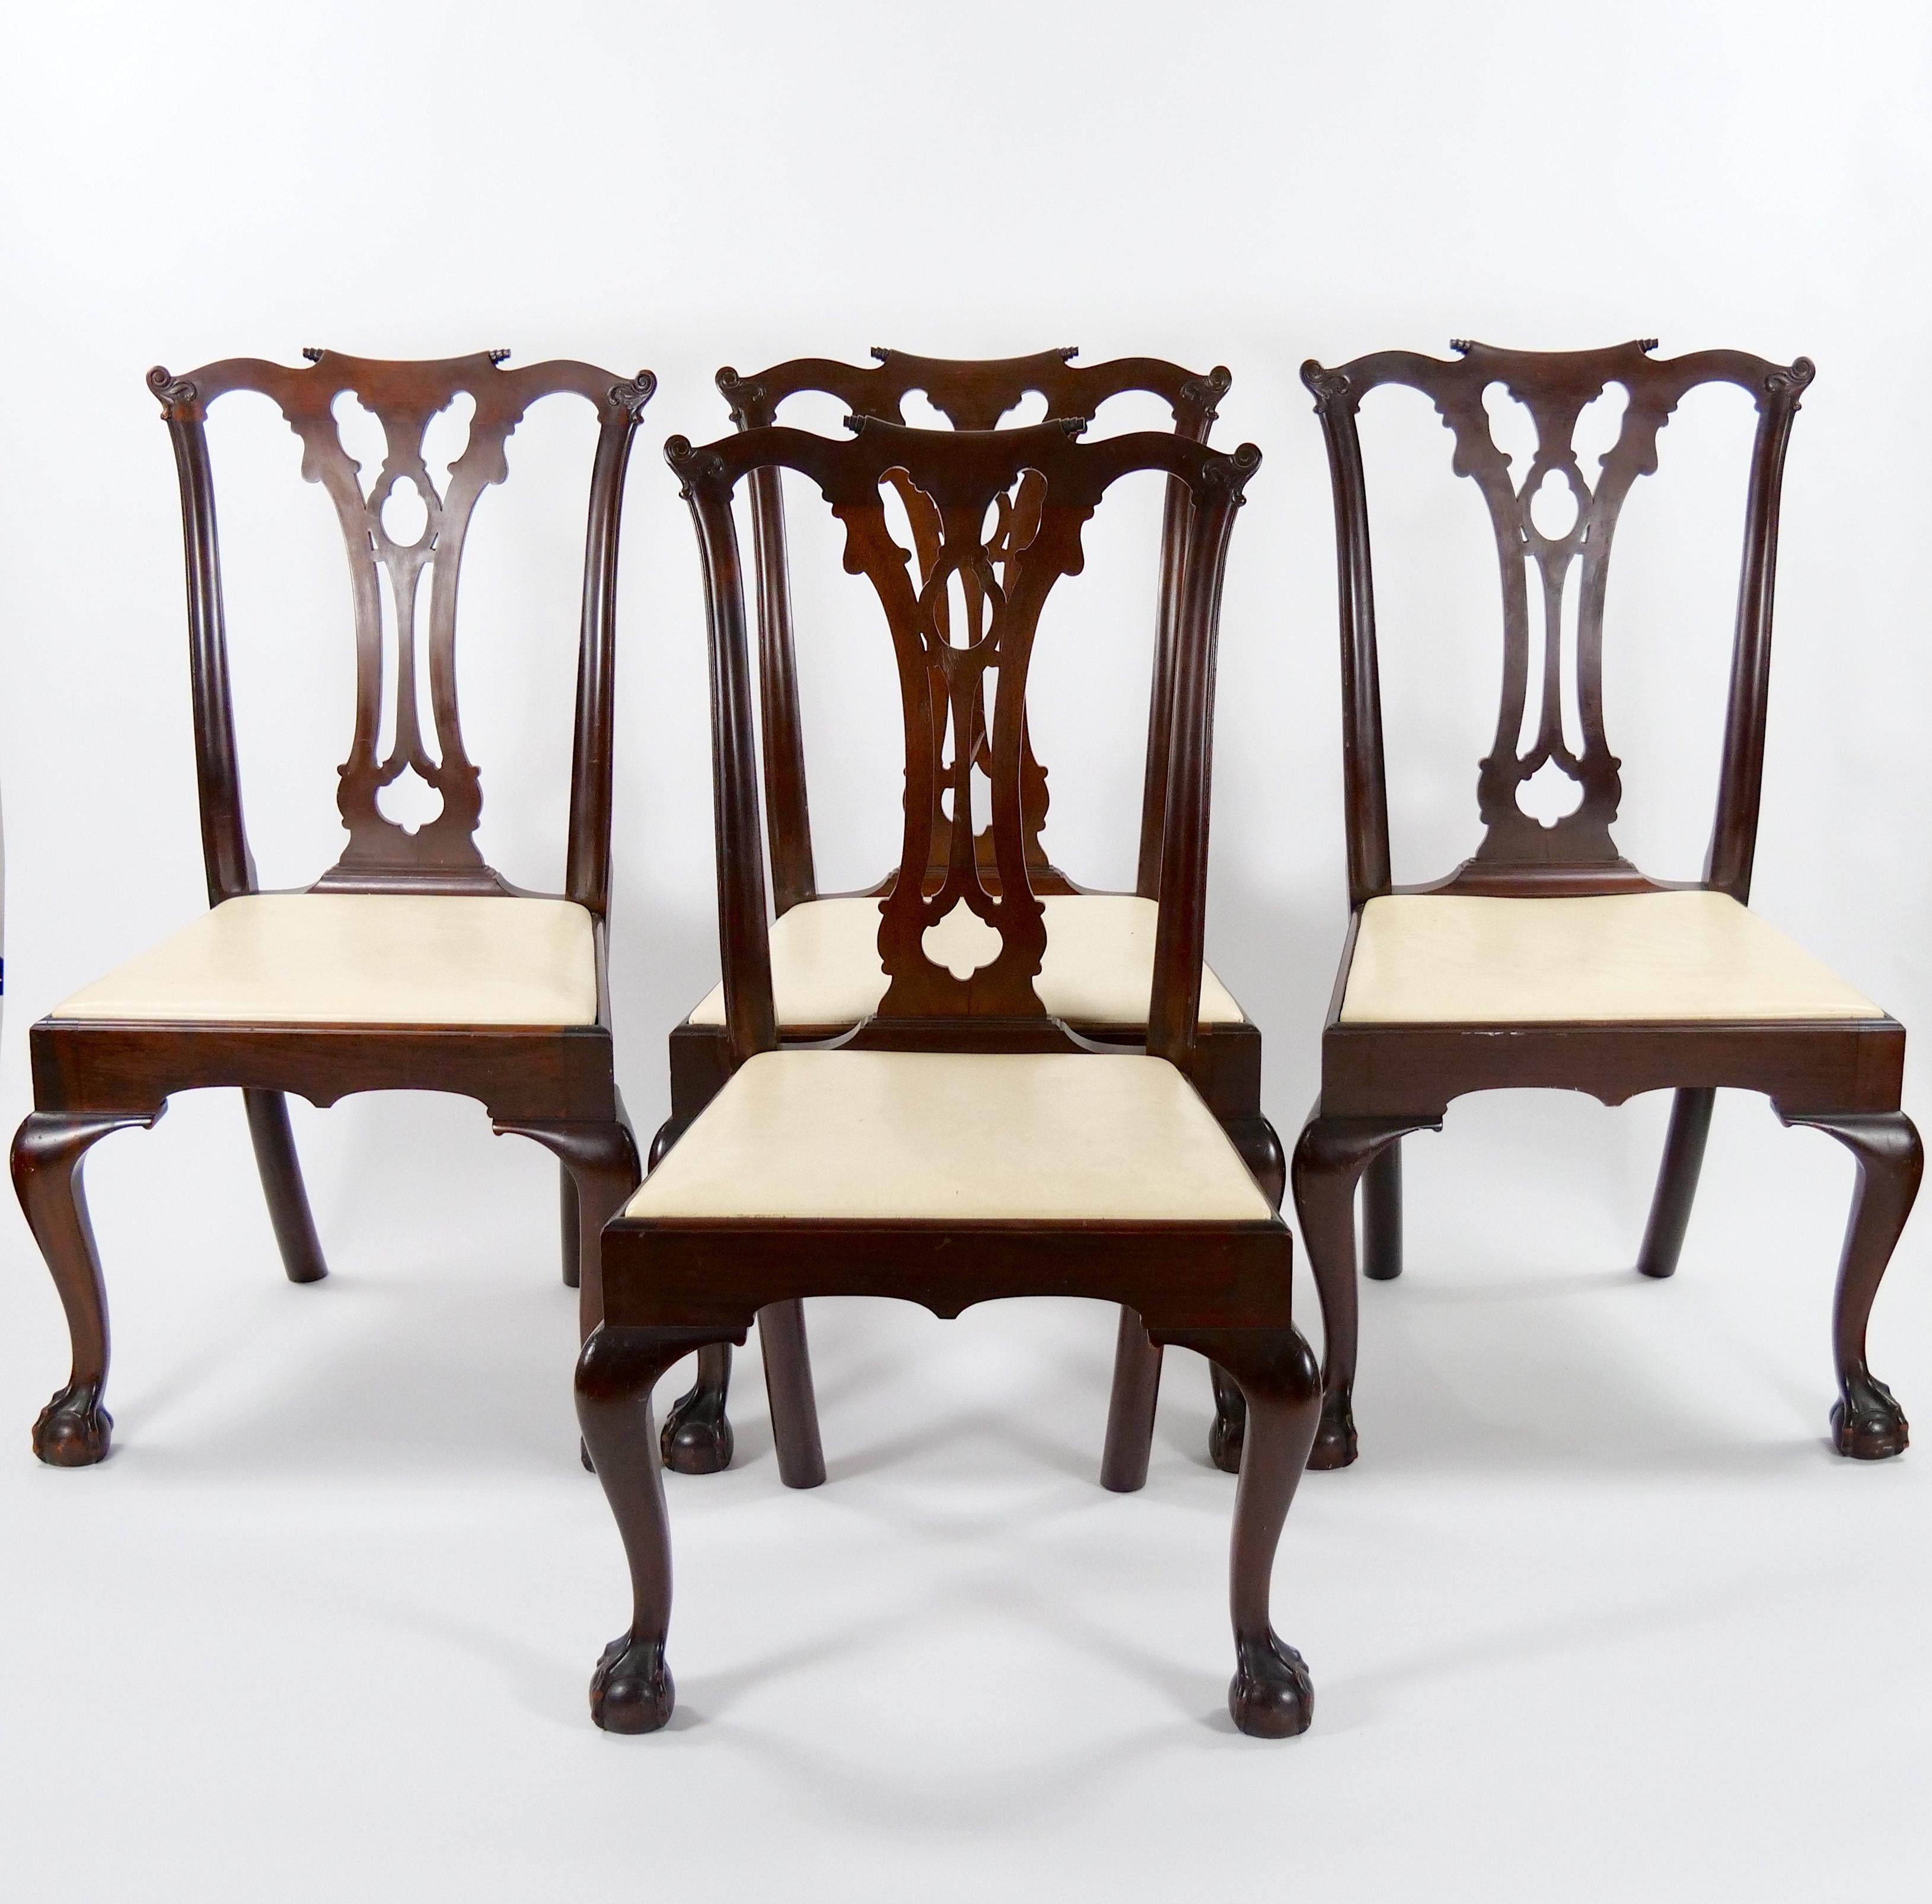 European Mahogany Wood Framed (8) Chippendale Style Dining Chairs For Sale